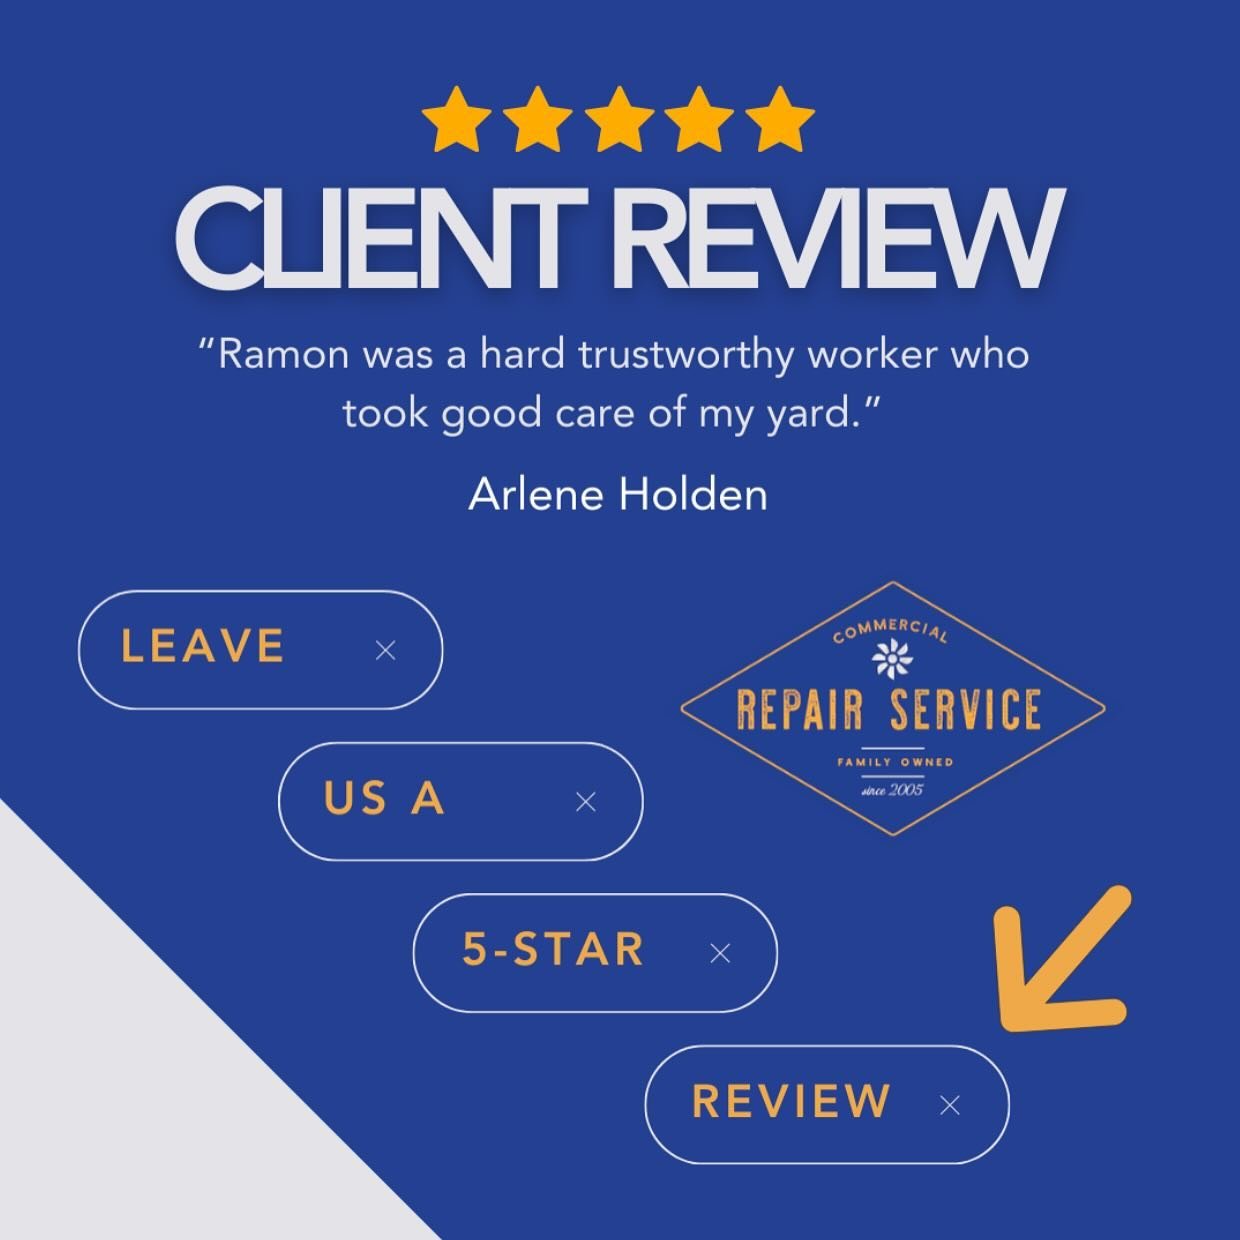 Are you thrilled with our services? 

Join our satisfied customers and leave us a glowing five-star Google review! 

Share what you love about our services. Your feedback means the world to us!

...
#CommercialRepairService #Repair #Tuscon #Handyman 